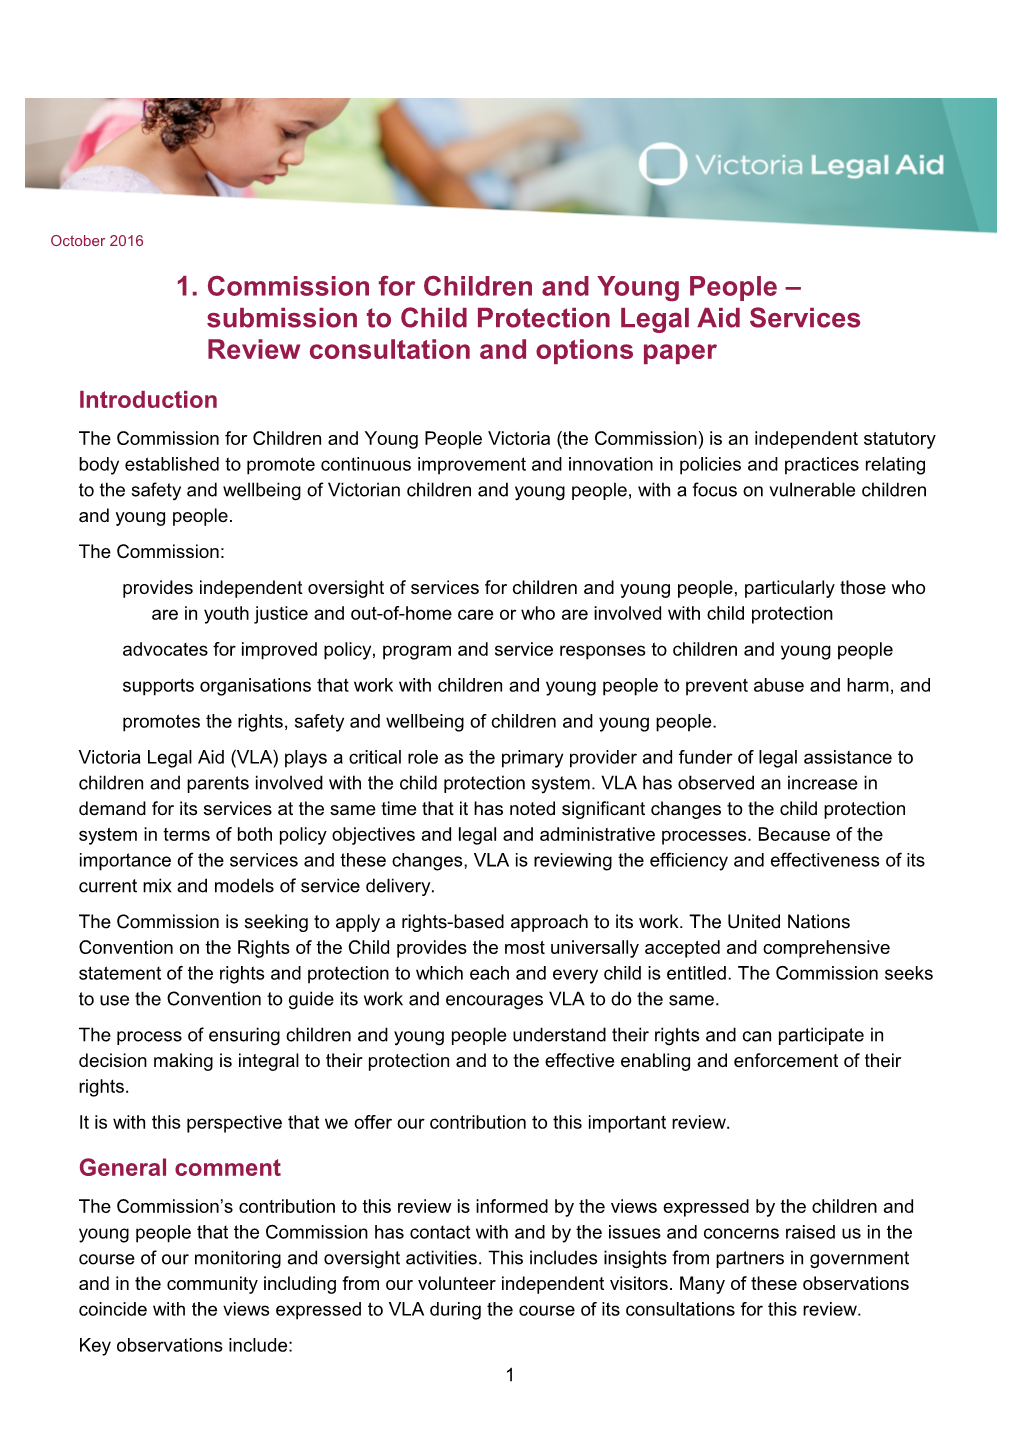 Child Protection Legal Aid Services Review Consultation and Options Paper Response Commission